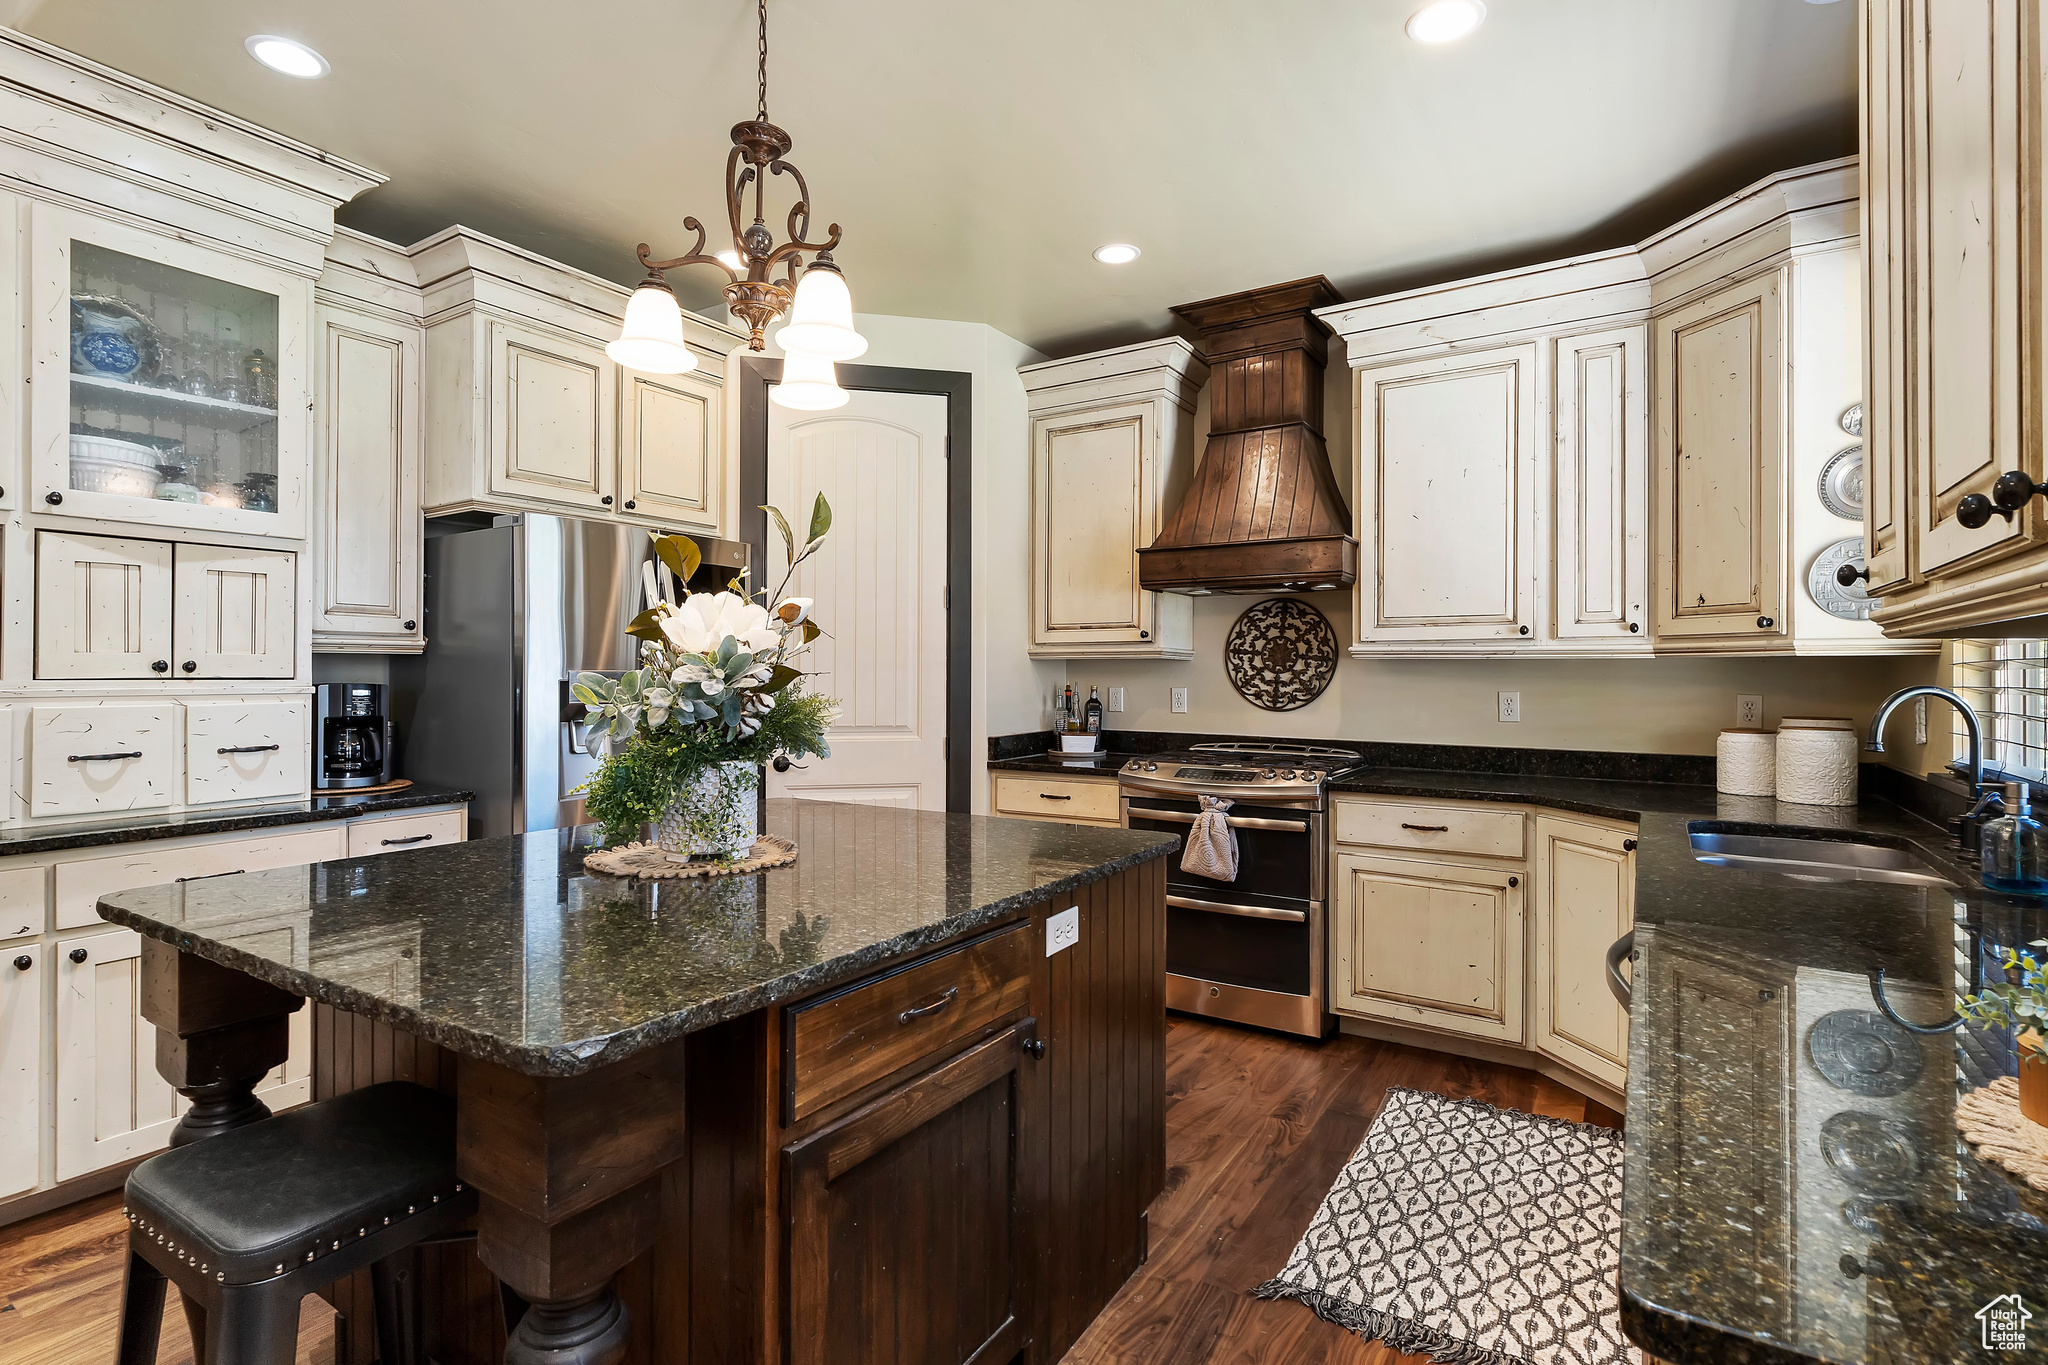 Kitchen featuring custom exhaust hood, a chandelier, appliances with stainless steel finishes, a center island, and dark hardwood / wood-style floors